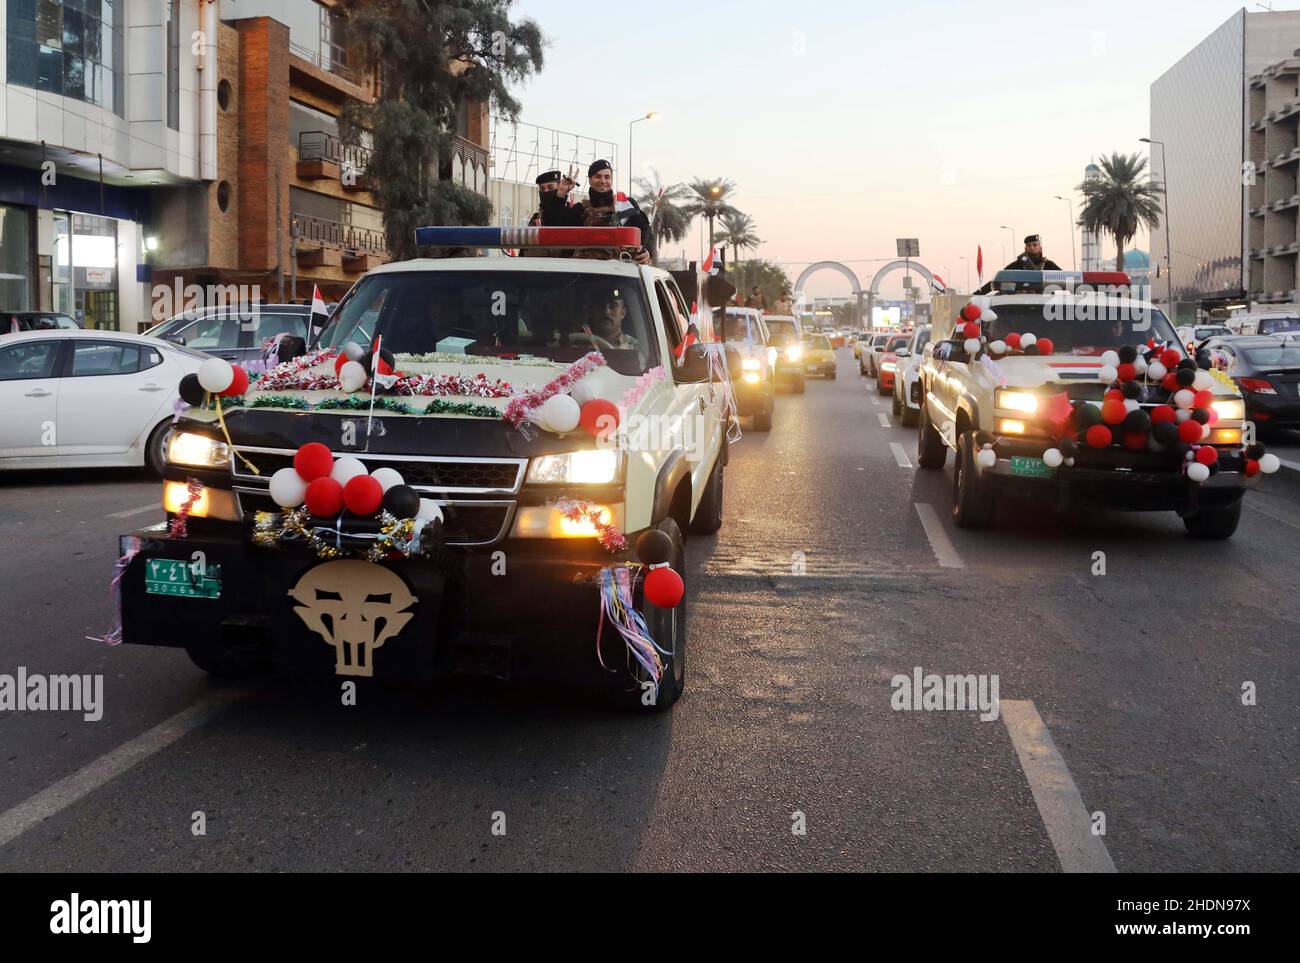 Baghdad. 6th Jan, 2022. Military vehicles are seen on a street during a celebration of the Iraqi Army Day in Baghdad, Iraq, on Jan. 6. 2022. Credit: Khalil Dawood/Xinhua/Alamy Live News Stock Photo